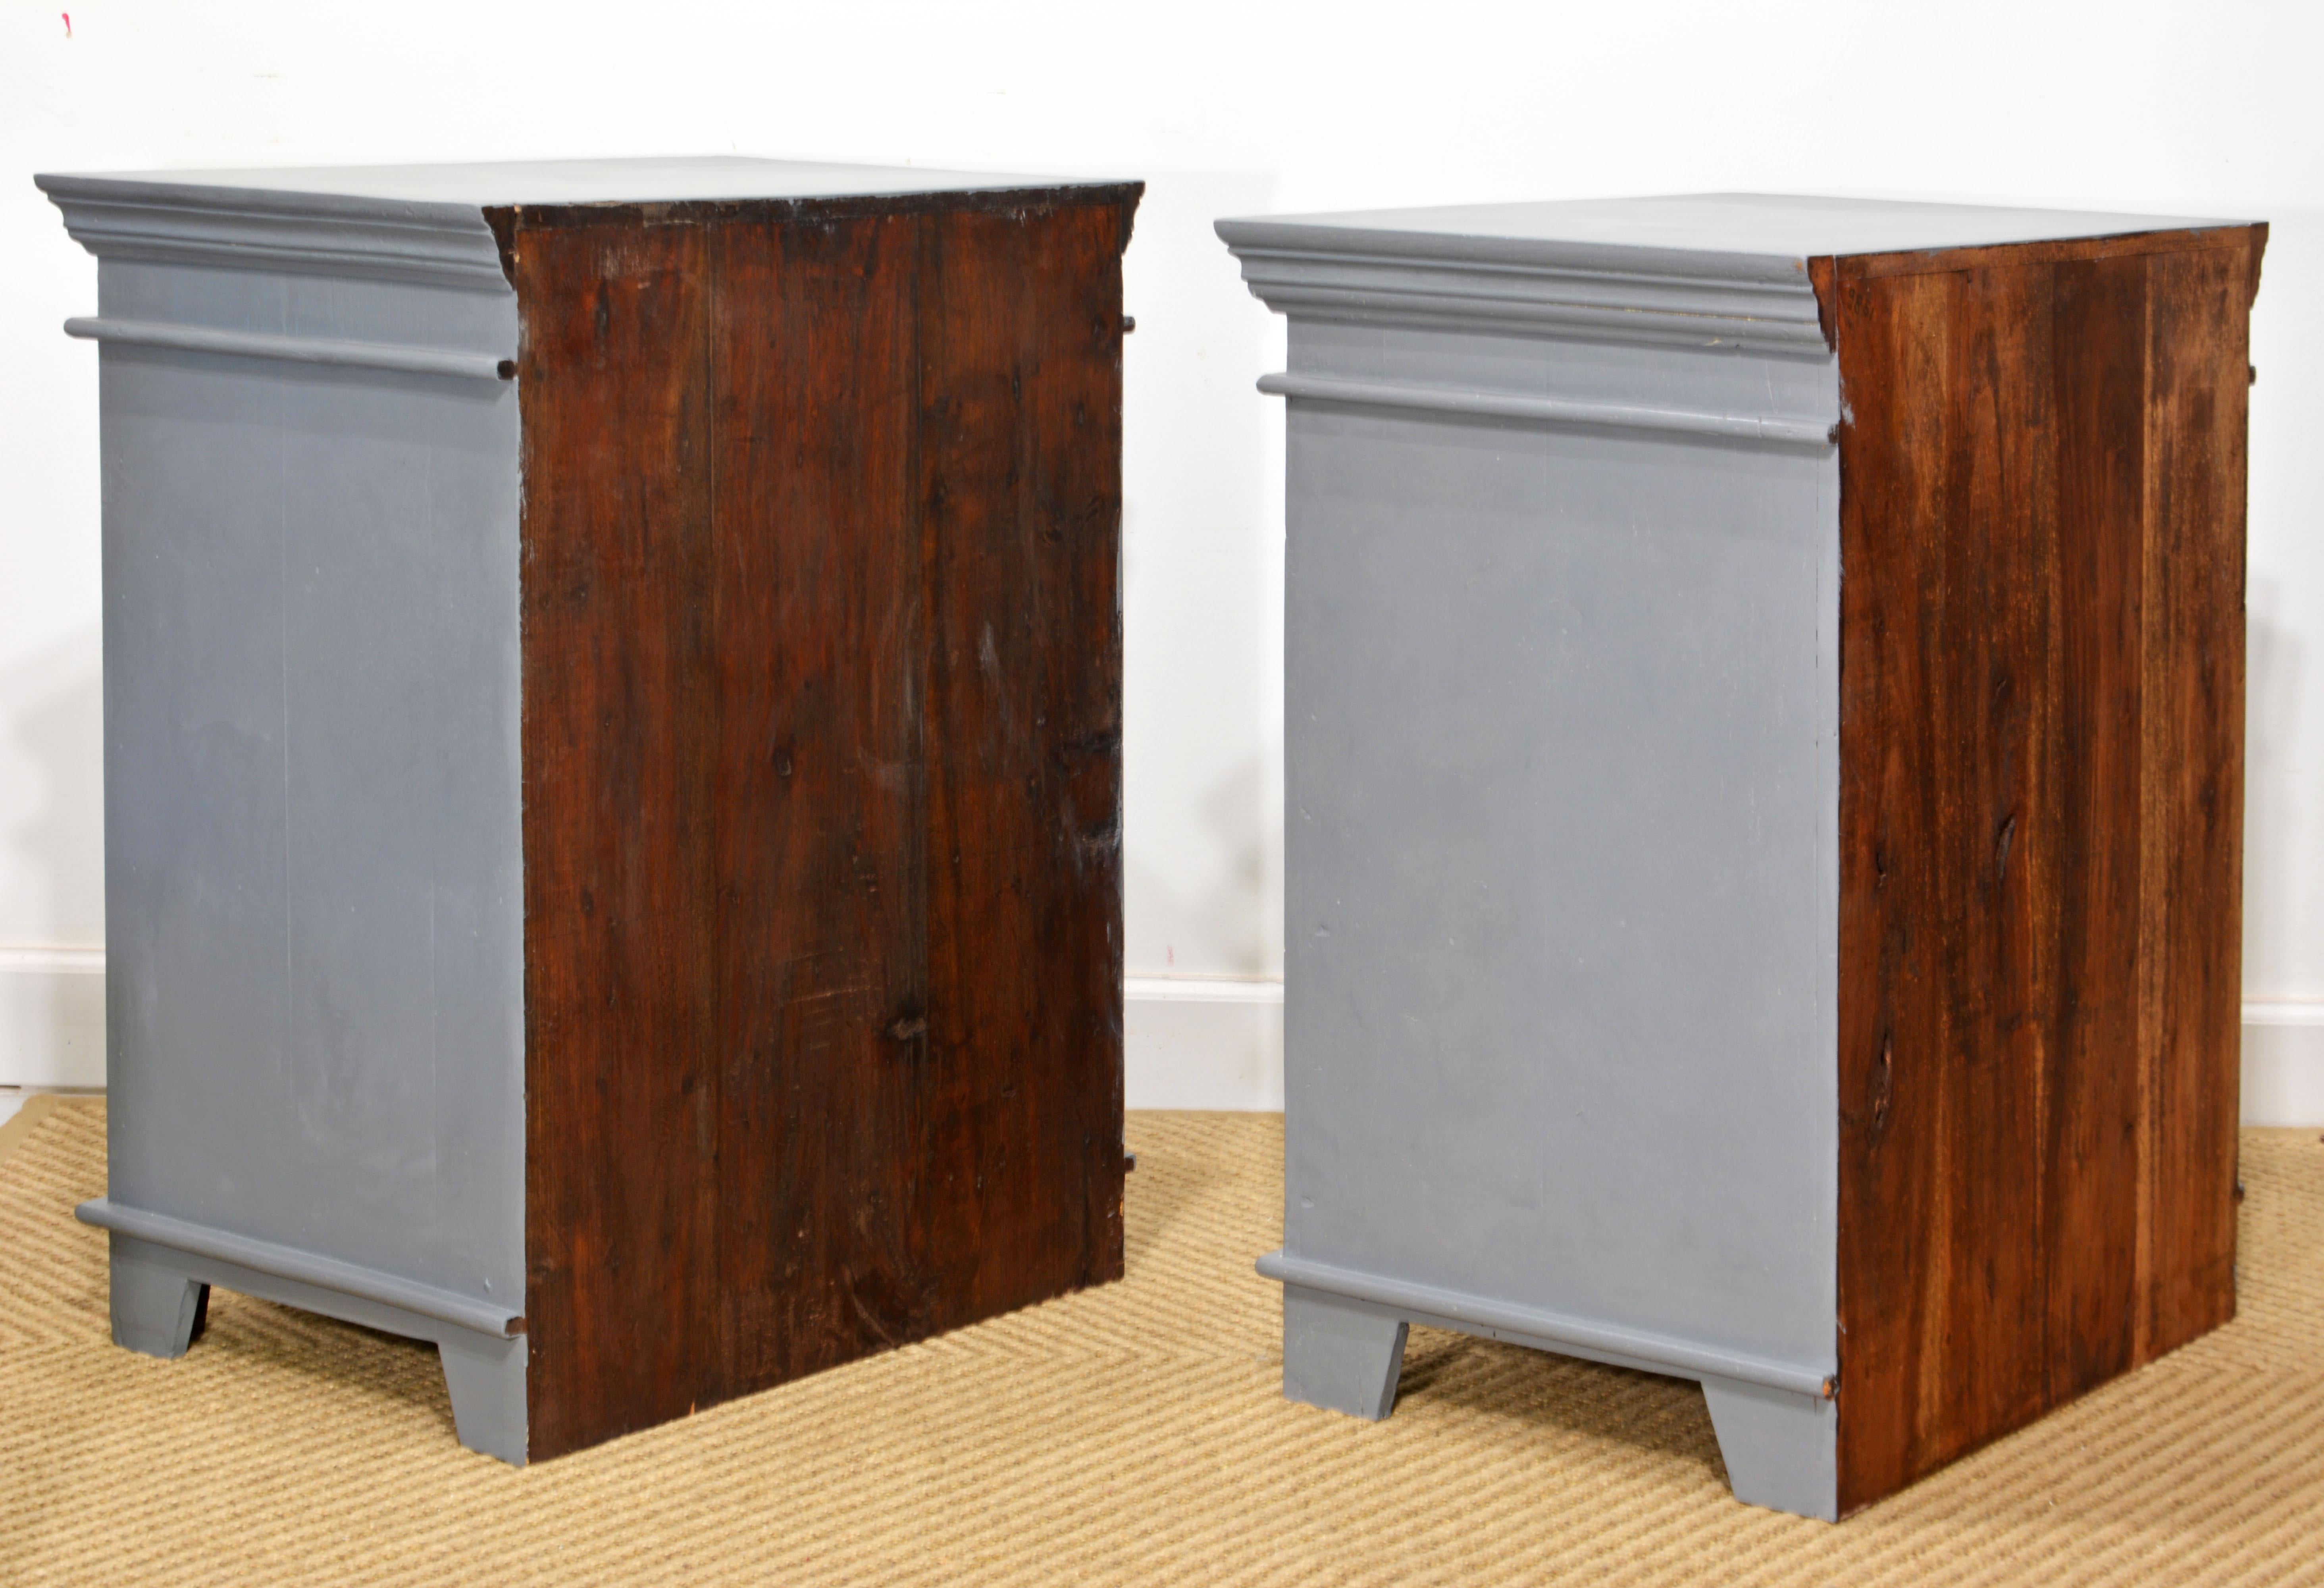 Brass Two Anglo-Indian British Colonial Style Painted Hardwood Bedside Cabinets, 1950s For Sale